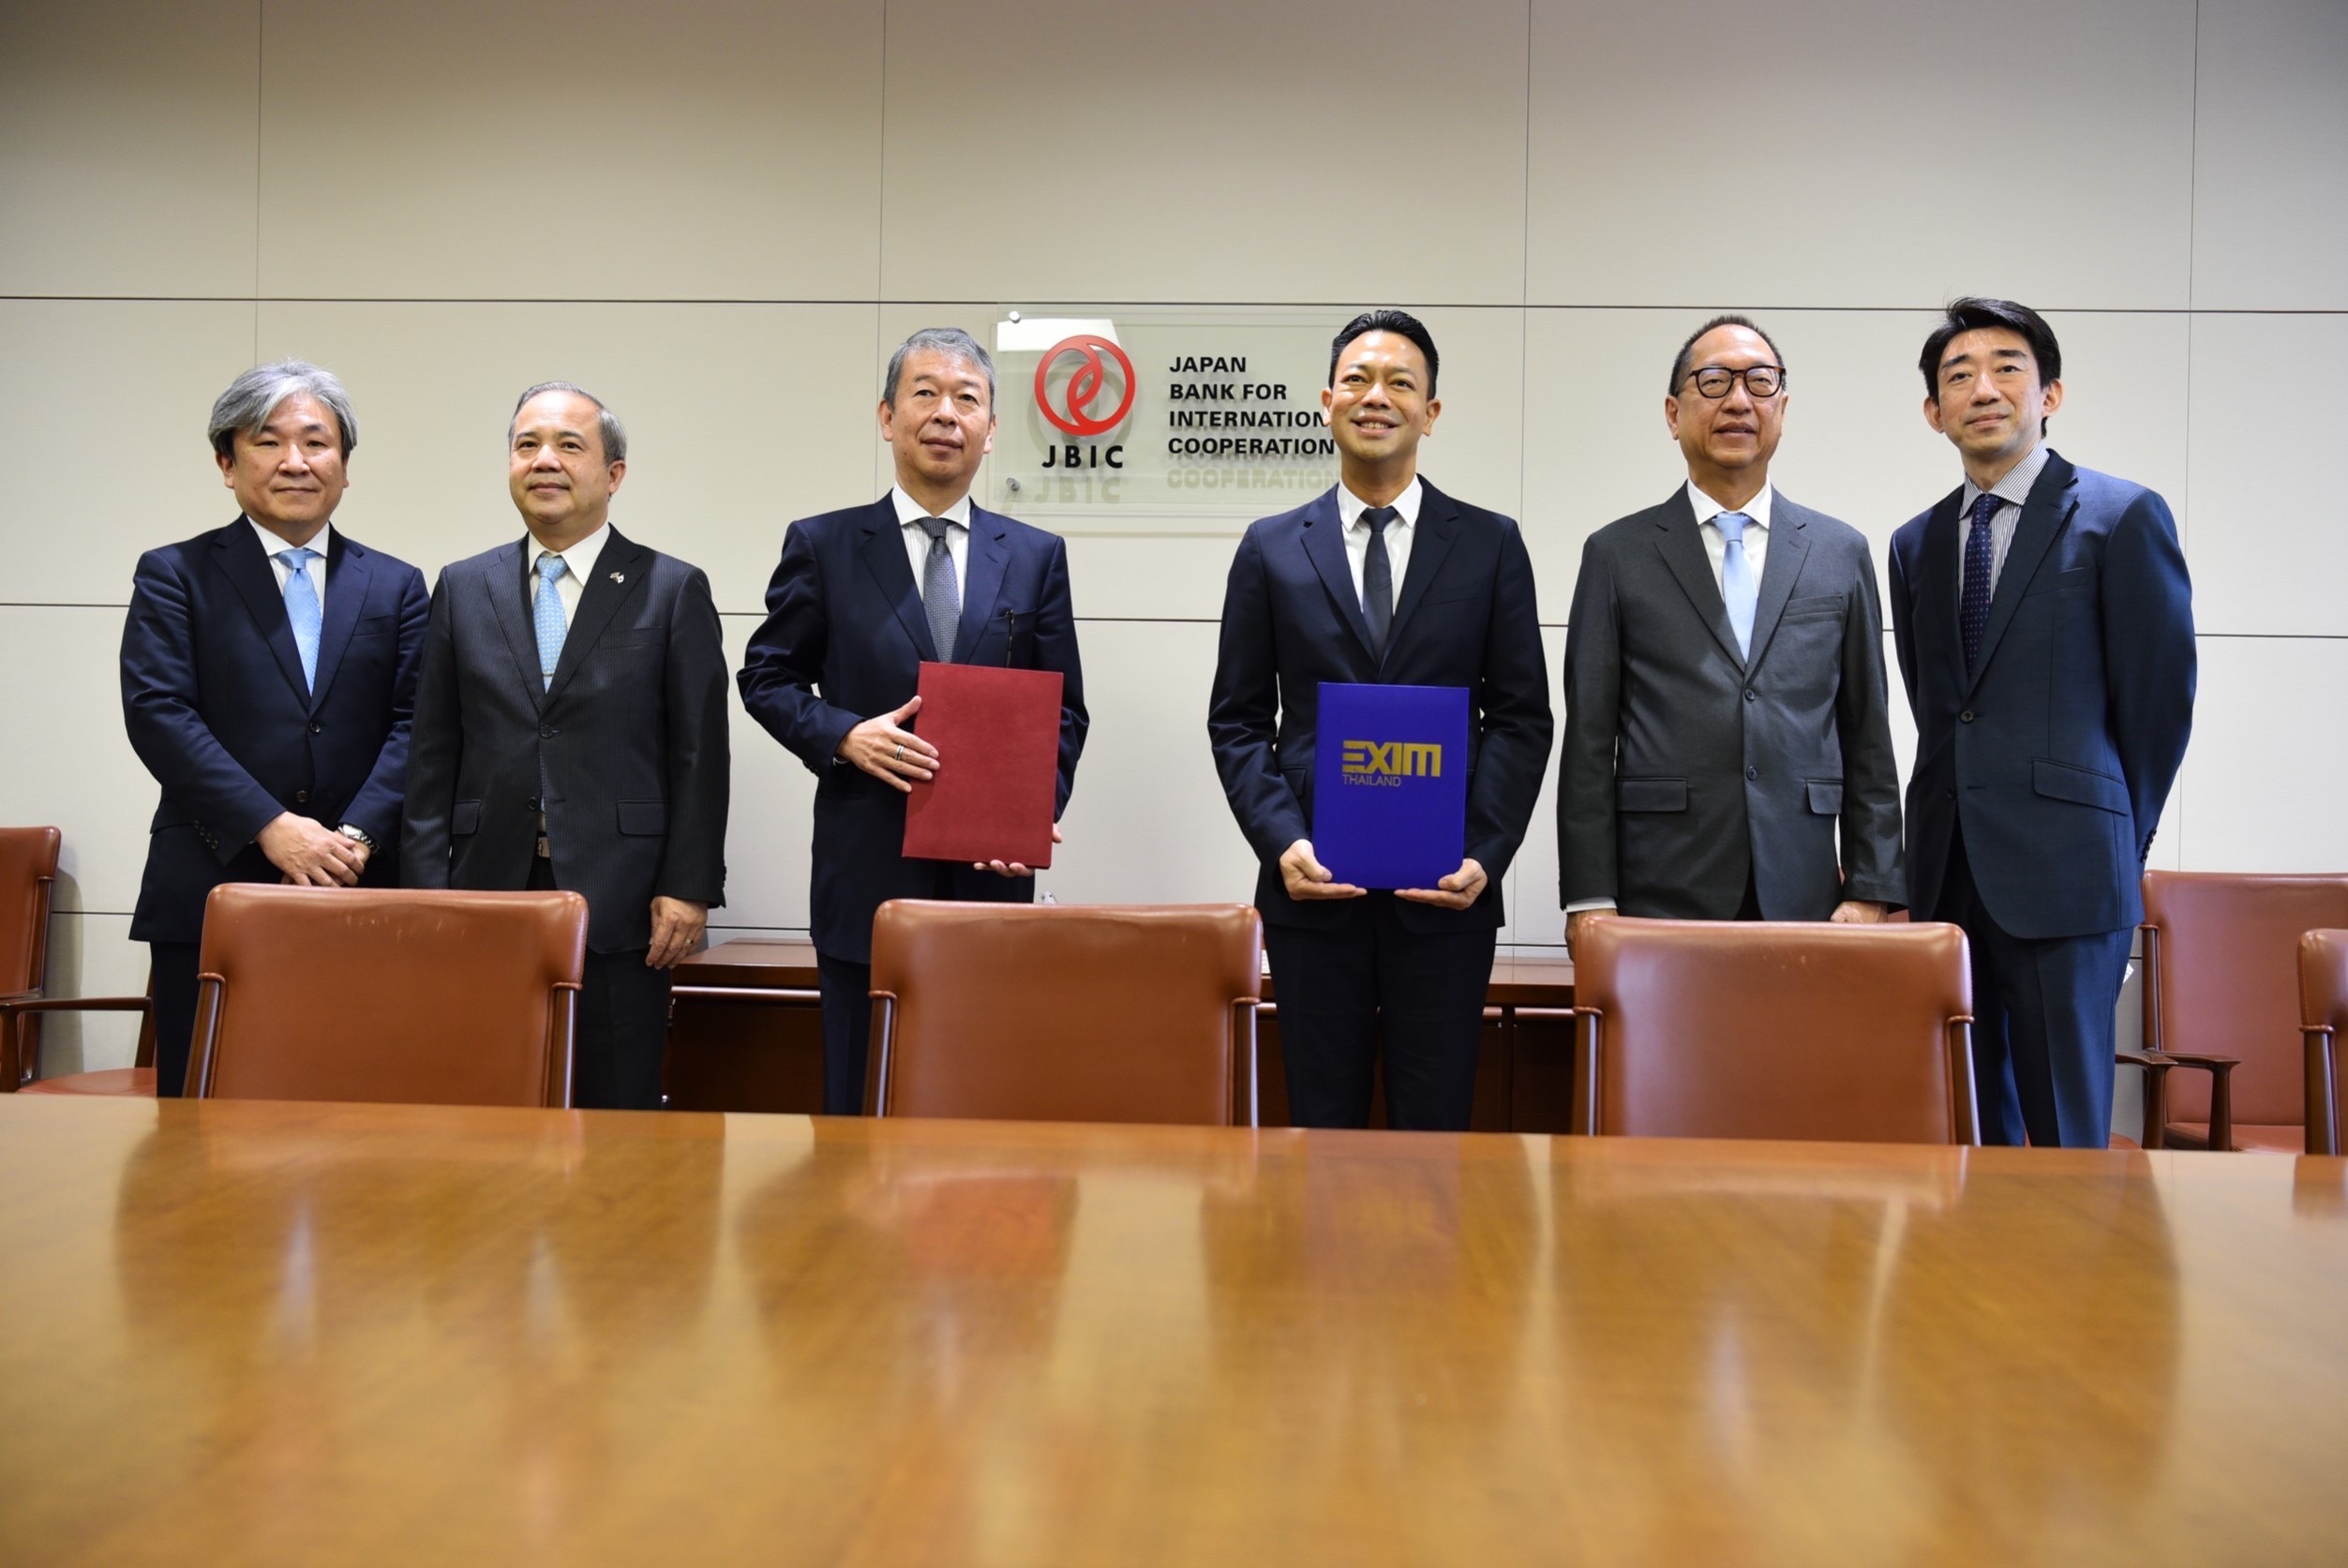 EXIM Thailand and JBIC signed an MOU on Cooperation in Promotion and Support of Trade and Investment